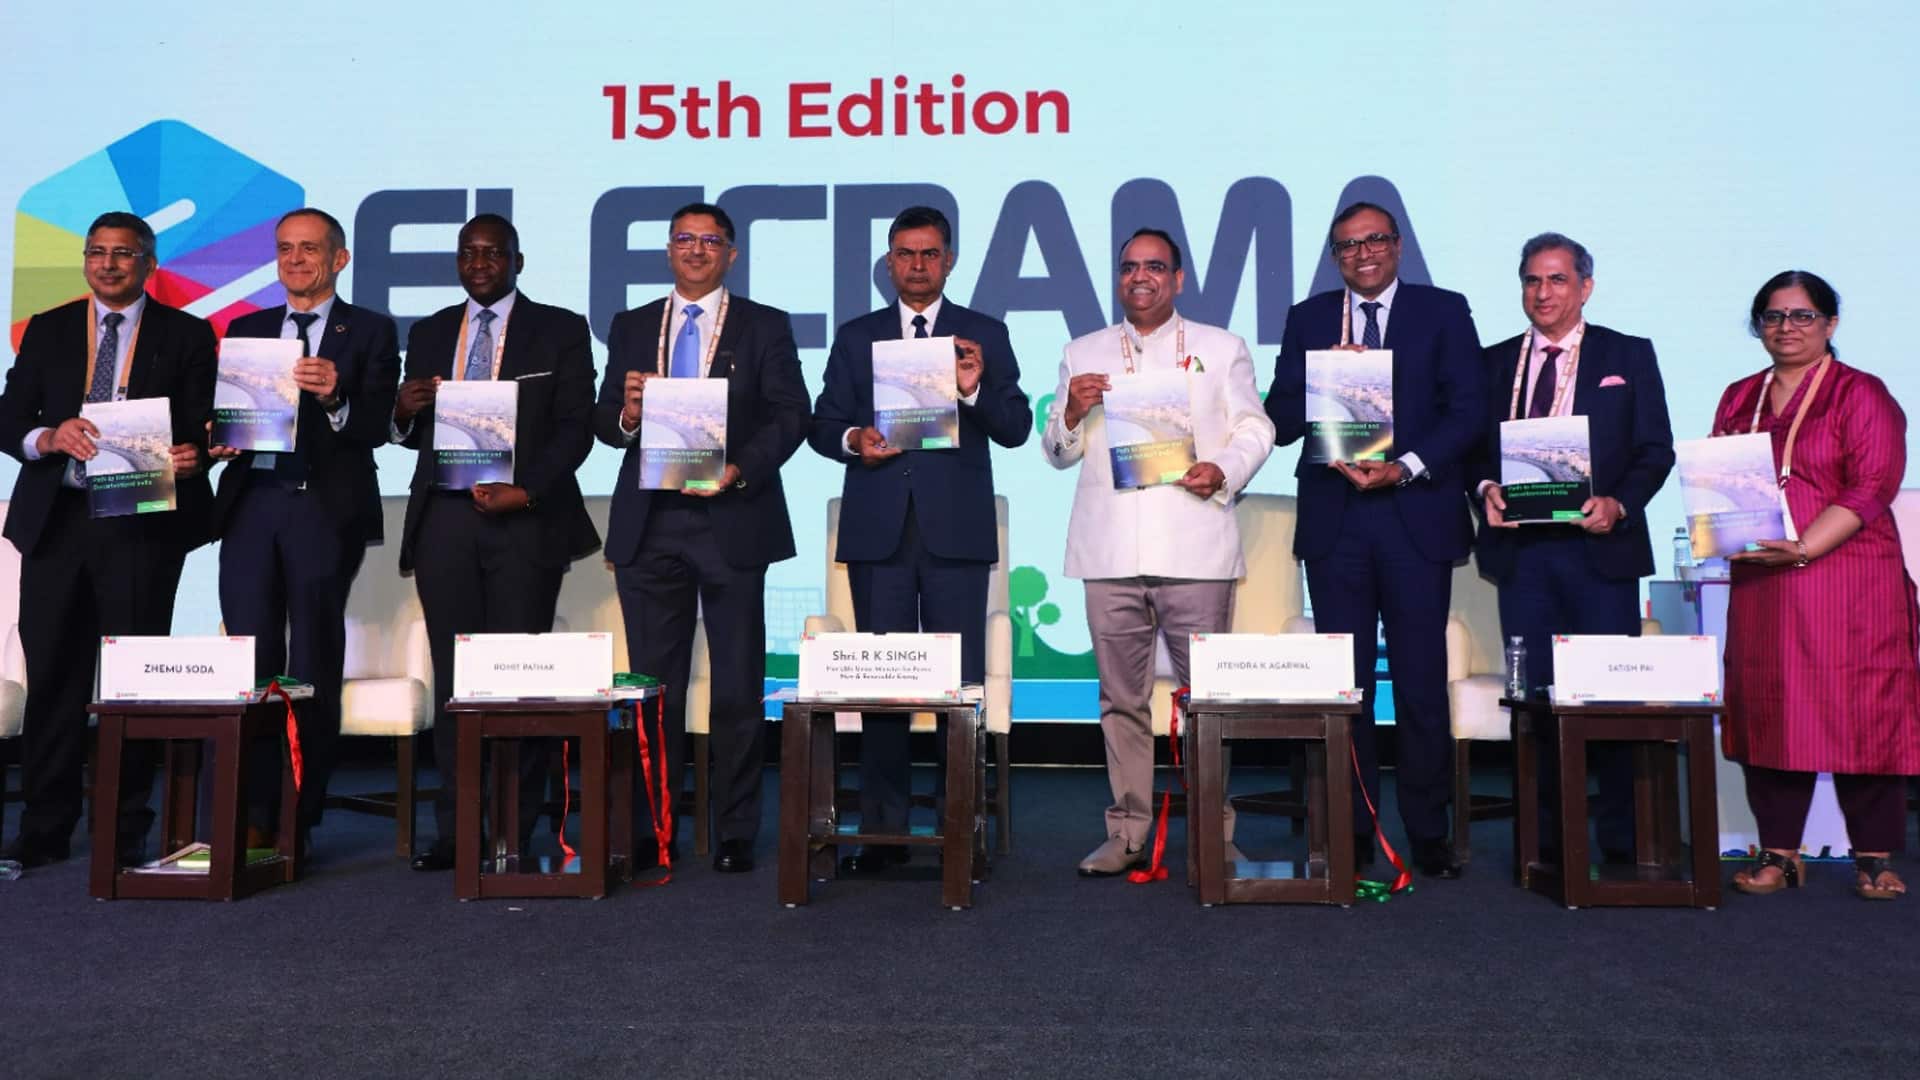 ELECRAMA 2023 Dazzles to an Electrifying Start with 1000 Exhibitors Showcasing Global Innovations